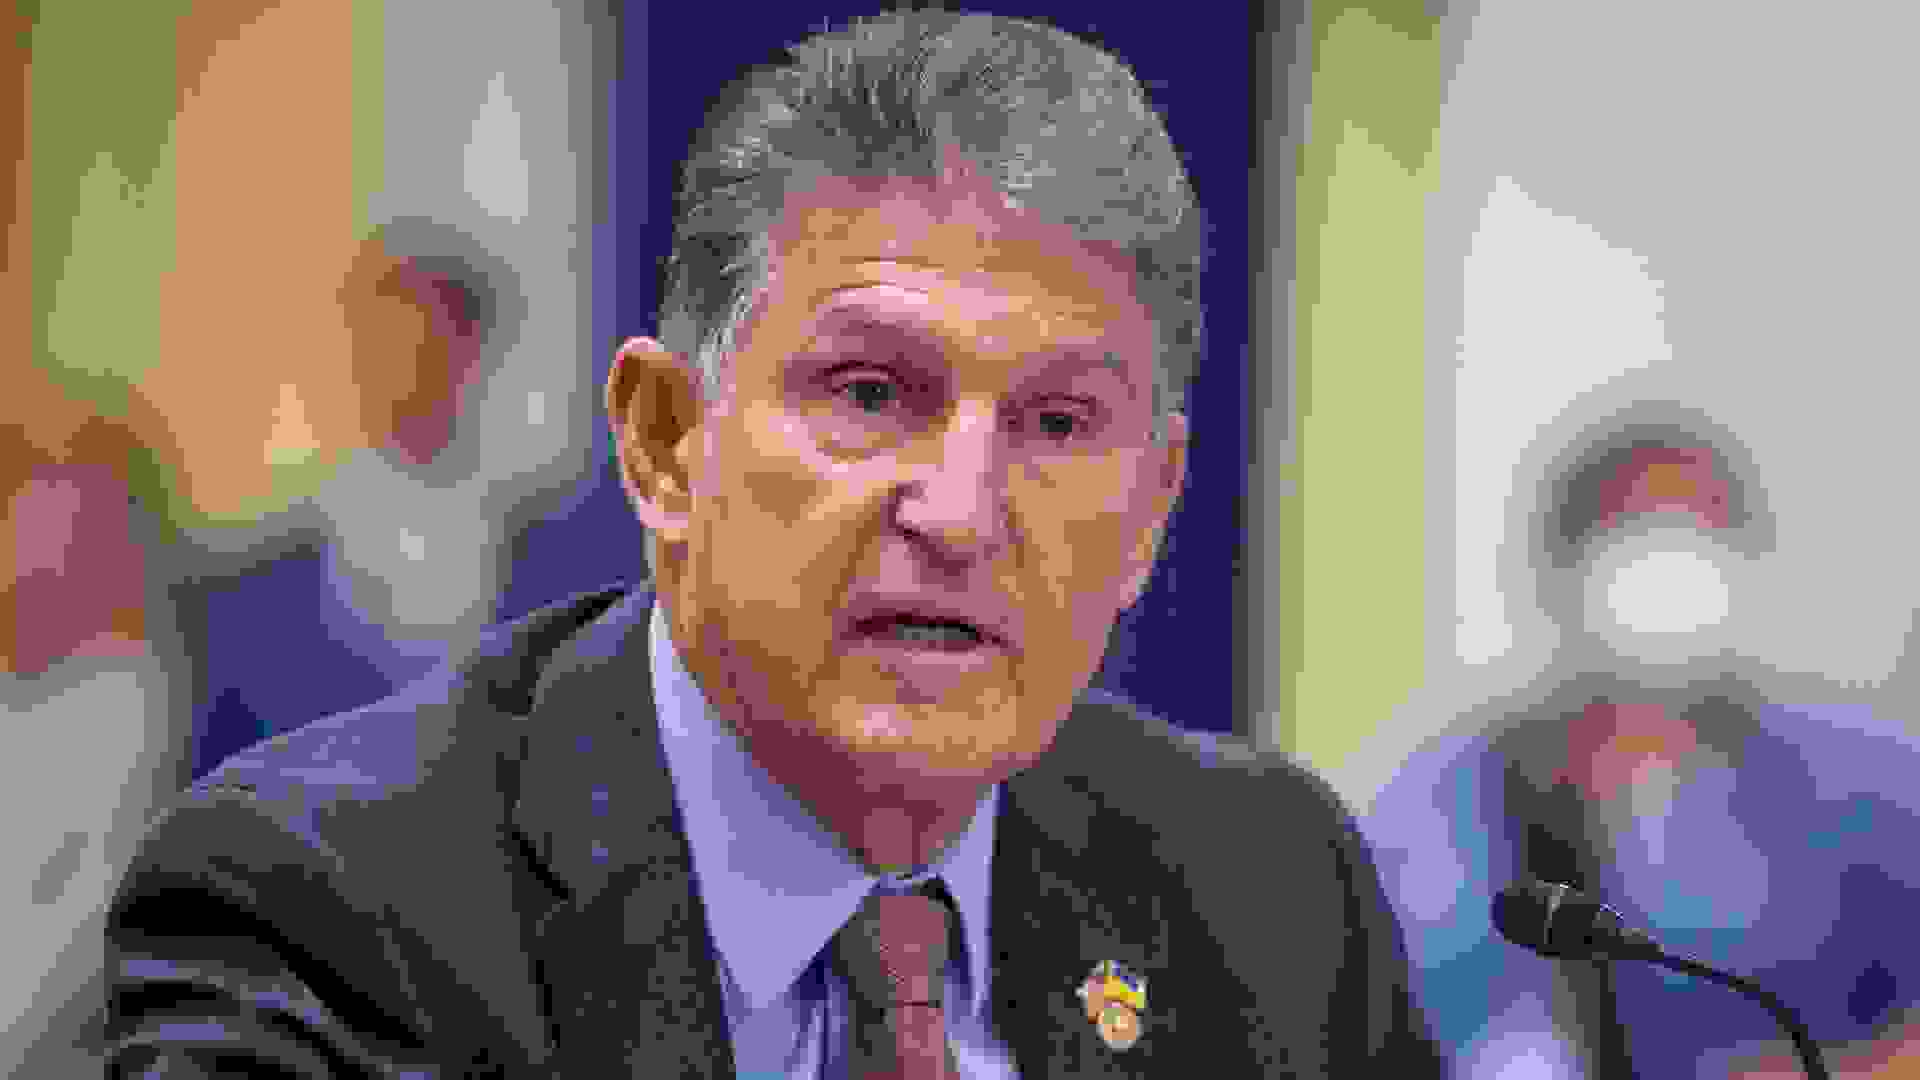 Mandatory Credit: Photo by Lamkey Rod/CNP/ABACA/Shutterstock (13065740af)United States Senator Joe Manchin III (Democrat of West Virginia) offers his opening statement during a Senate Committee Rules and Administration hearing to examine the Electoral Count Act, focusing on the need for reform, in the Russell Senate Office Building in Washington, DC, USA, Wednesday, August 3, 2022.